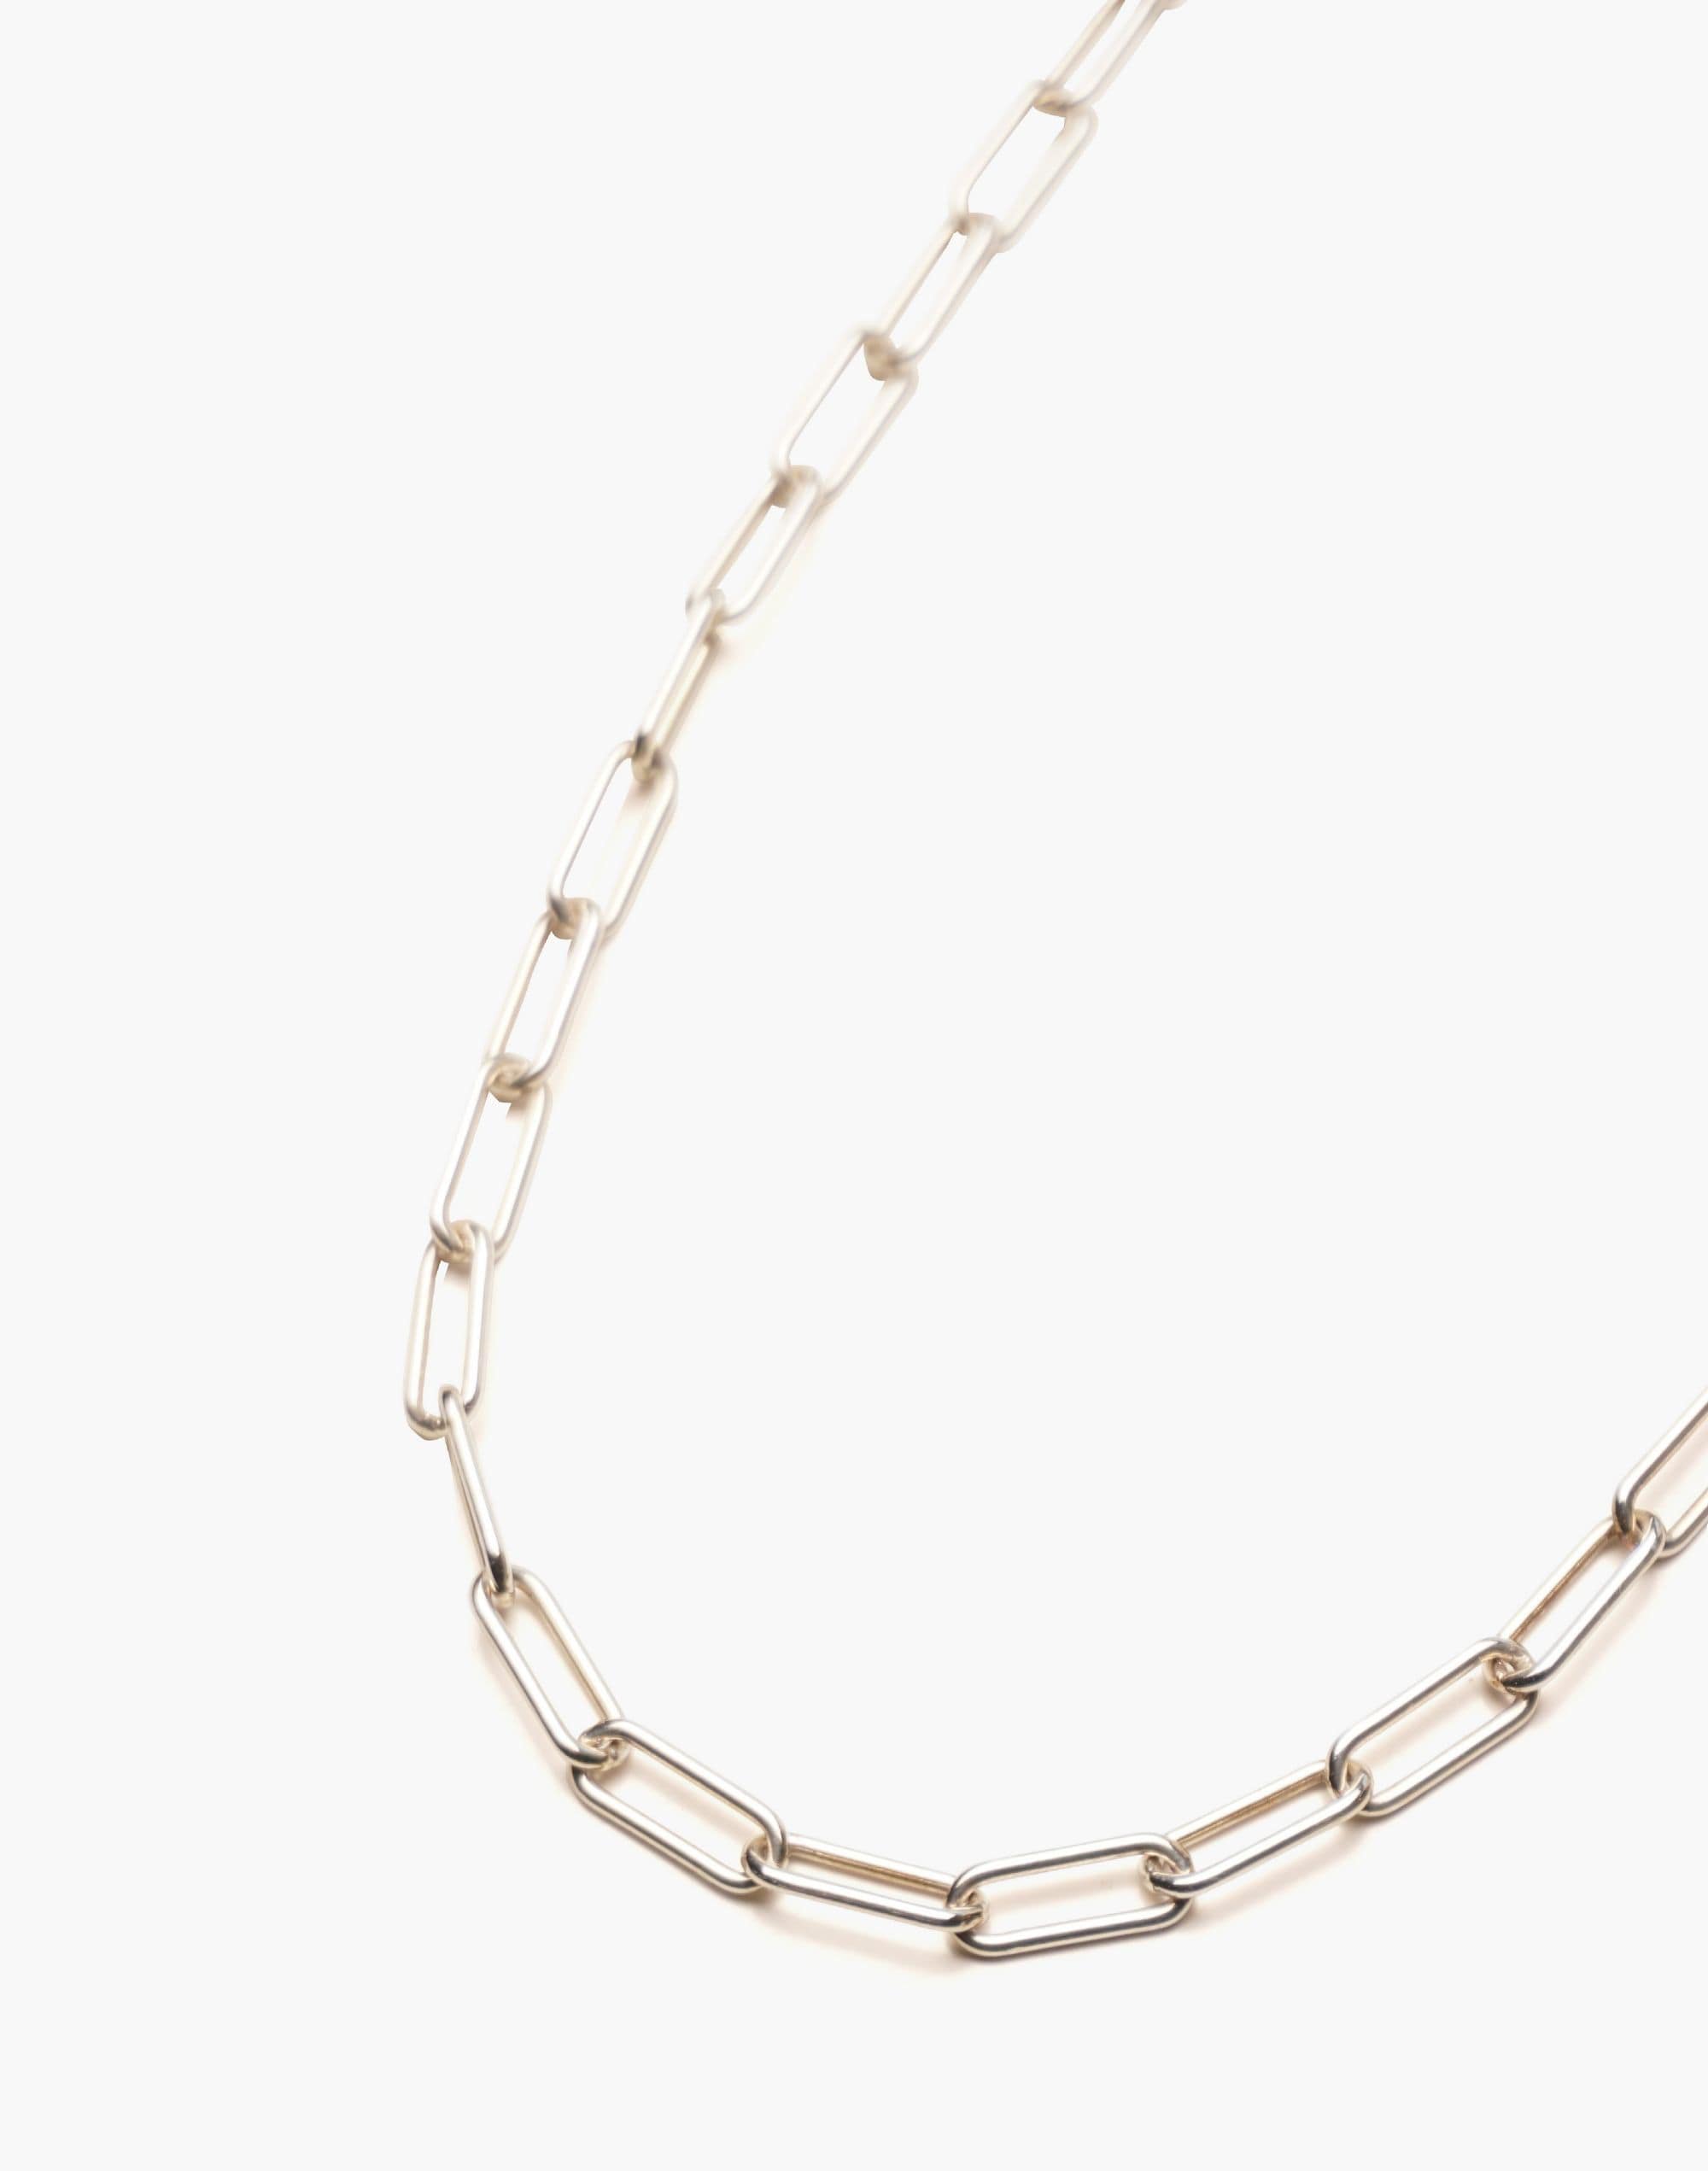 CHARLOTTE CAUWE STUDIO Paperclip Chain Necklace in Sterling Silver